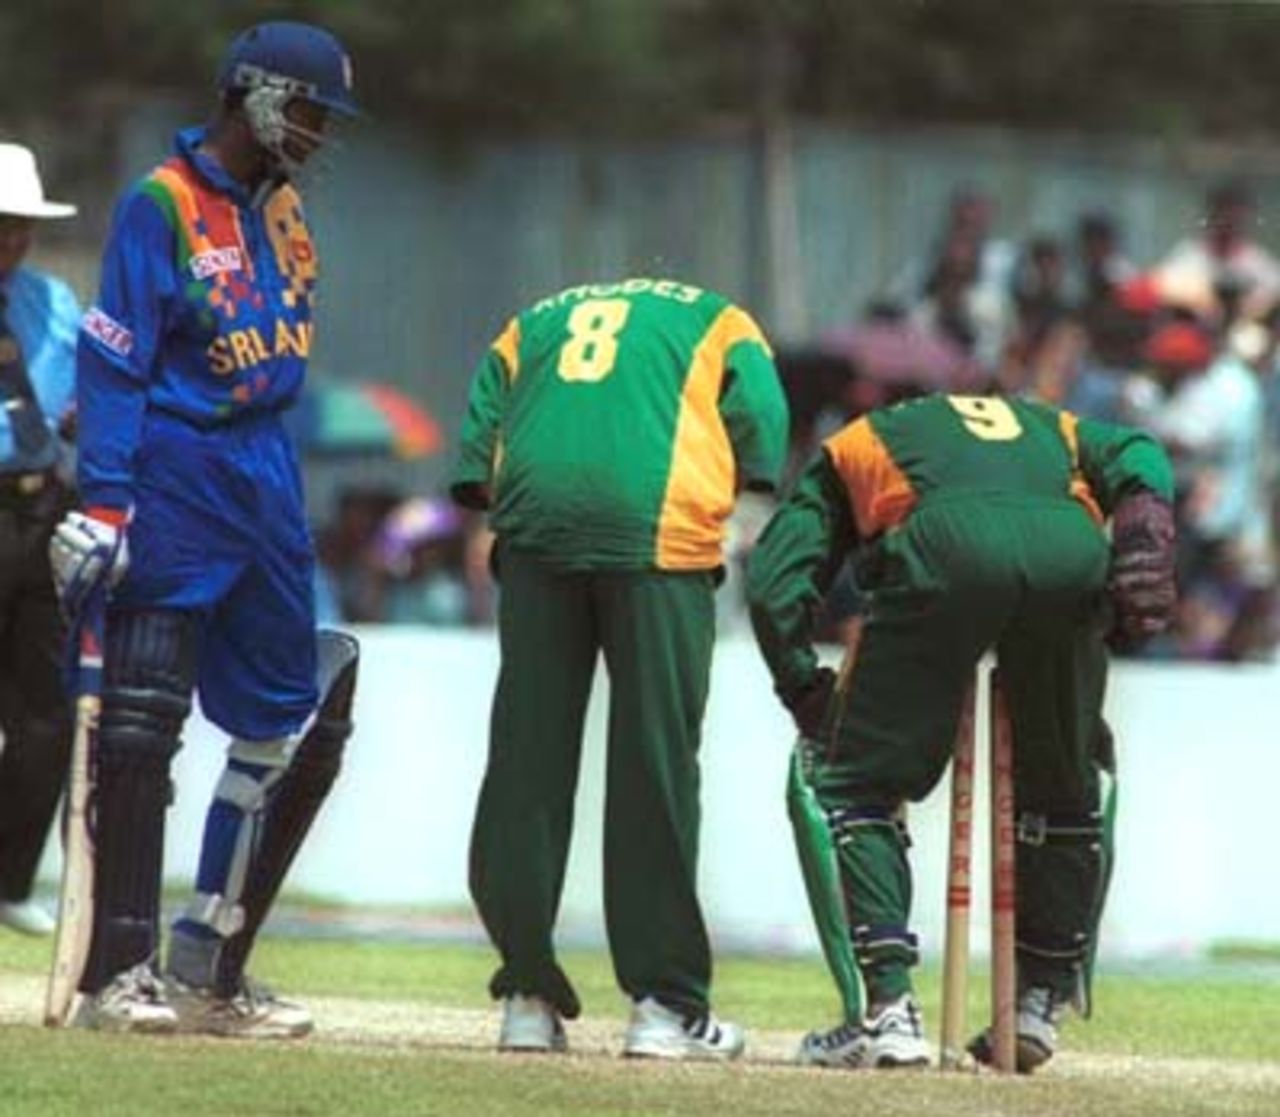 Mark Boucher falls over the stumps during the Singer Cup Triangular limited overs cricket match against South Africa in Galle International stadium in Galle Sri Lanka on Thursday, July. 6, 2000